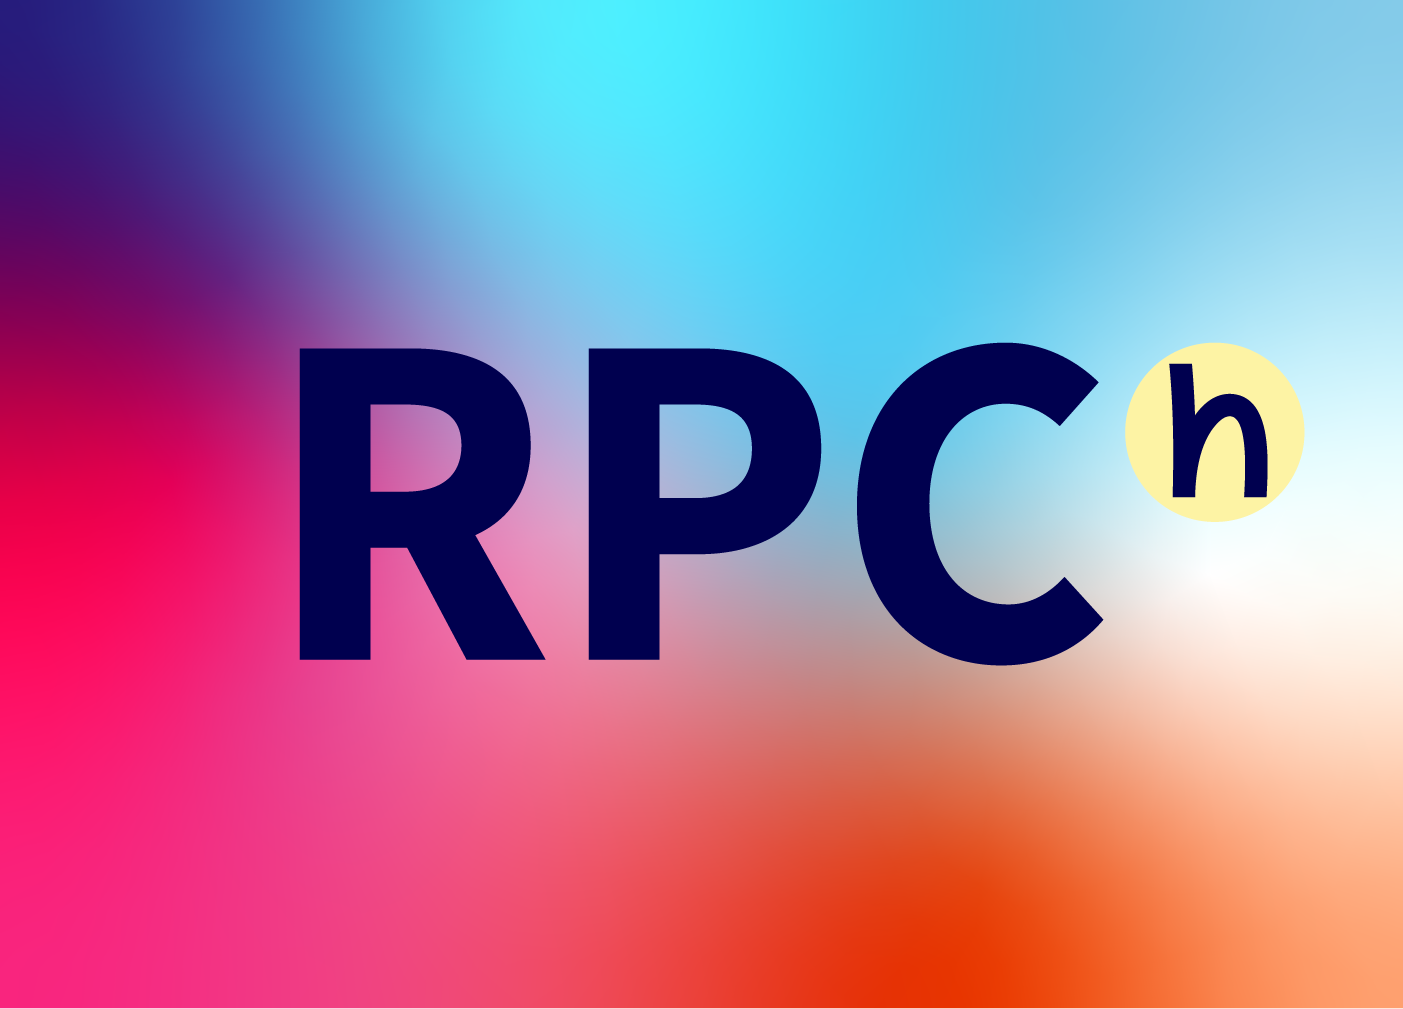 Logo of RPCh over a blue gradient background